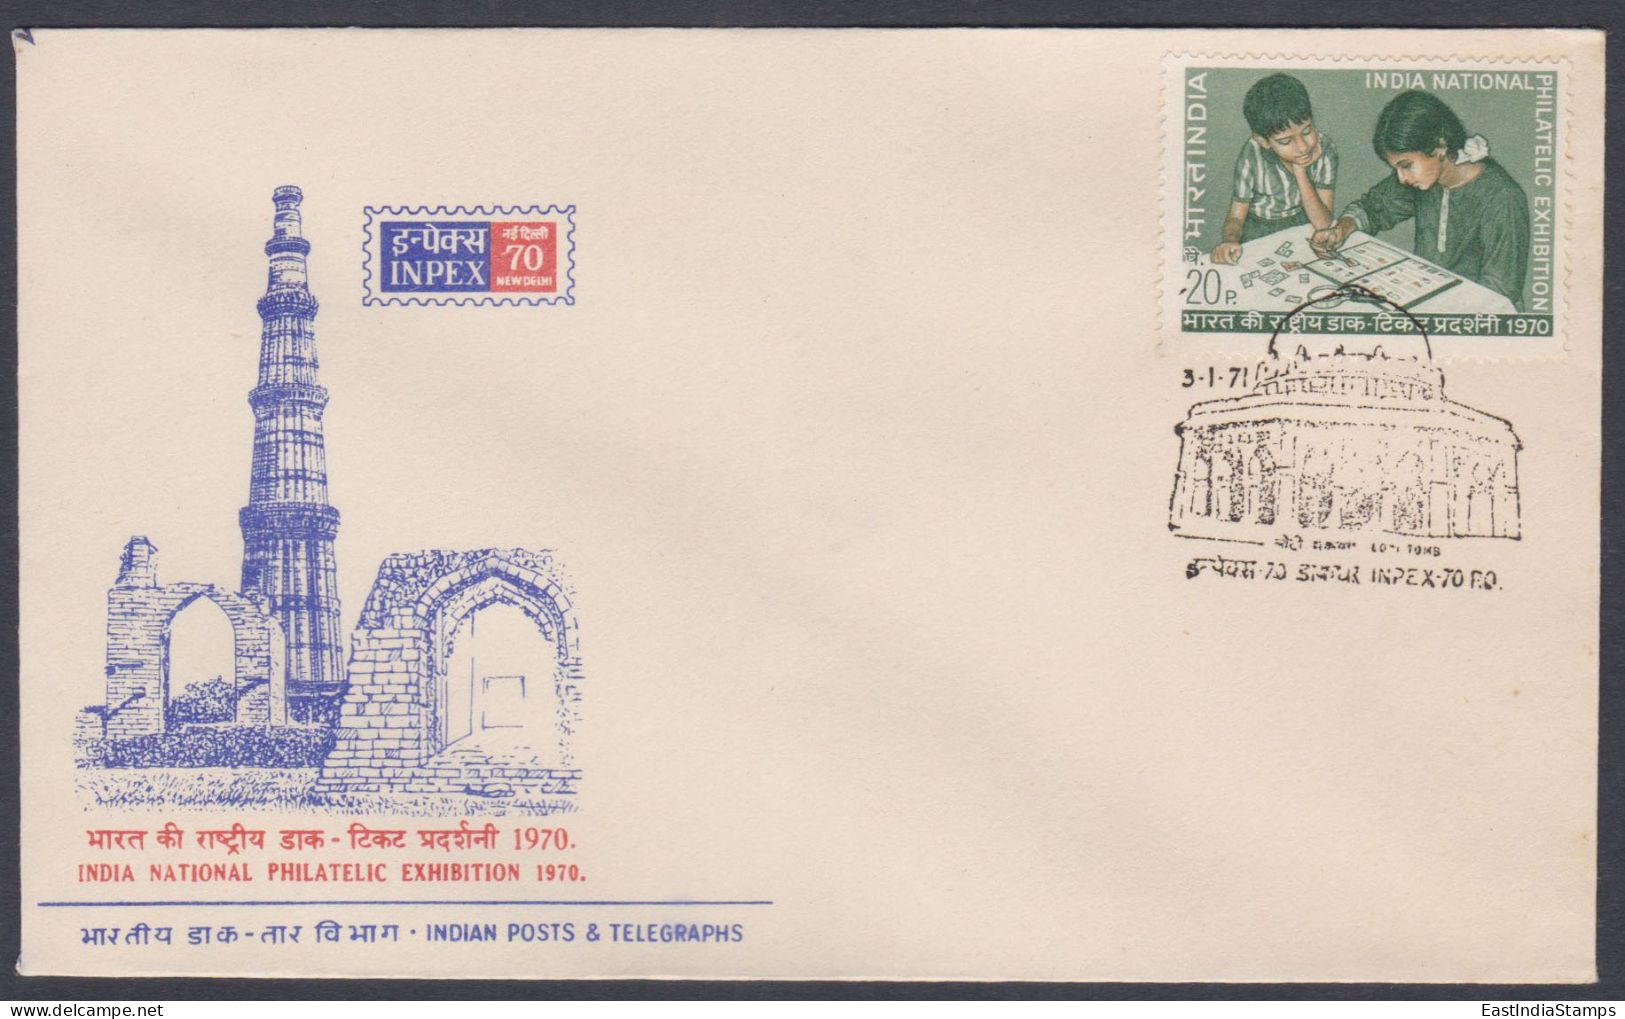 Inde India 1970 Special Cover Inpex Stamp Exhibition, Qutub Minar, Monument, Lodi Tomb, Architecture Pictorial Postmark - Covers & Documents